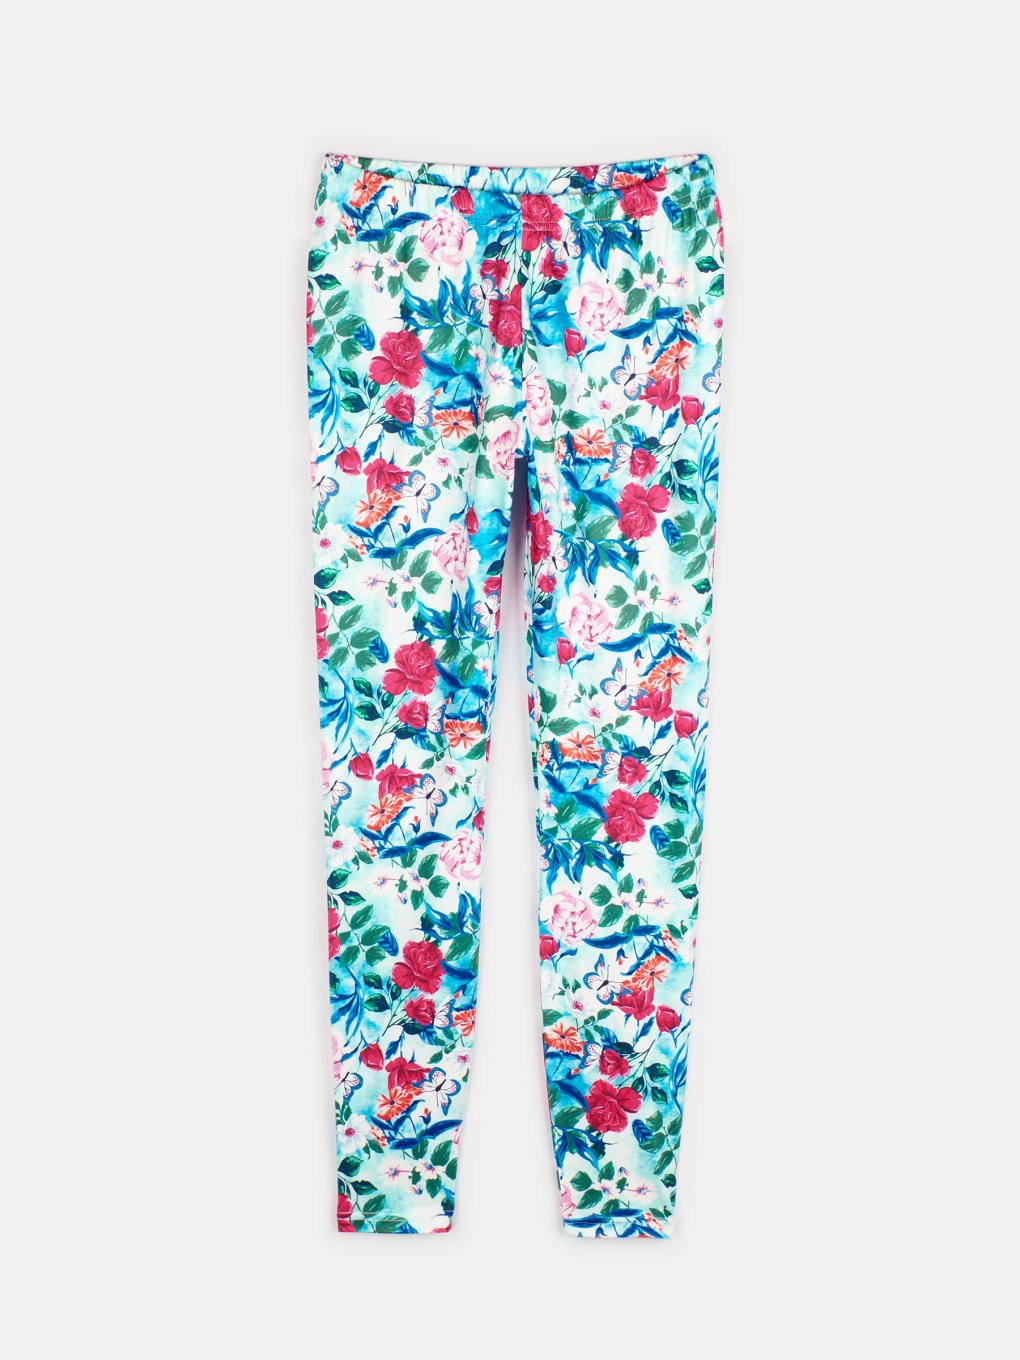 Leggings with floral print and ombre dye